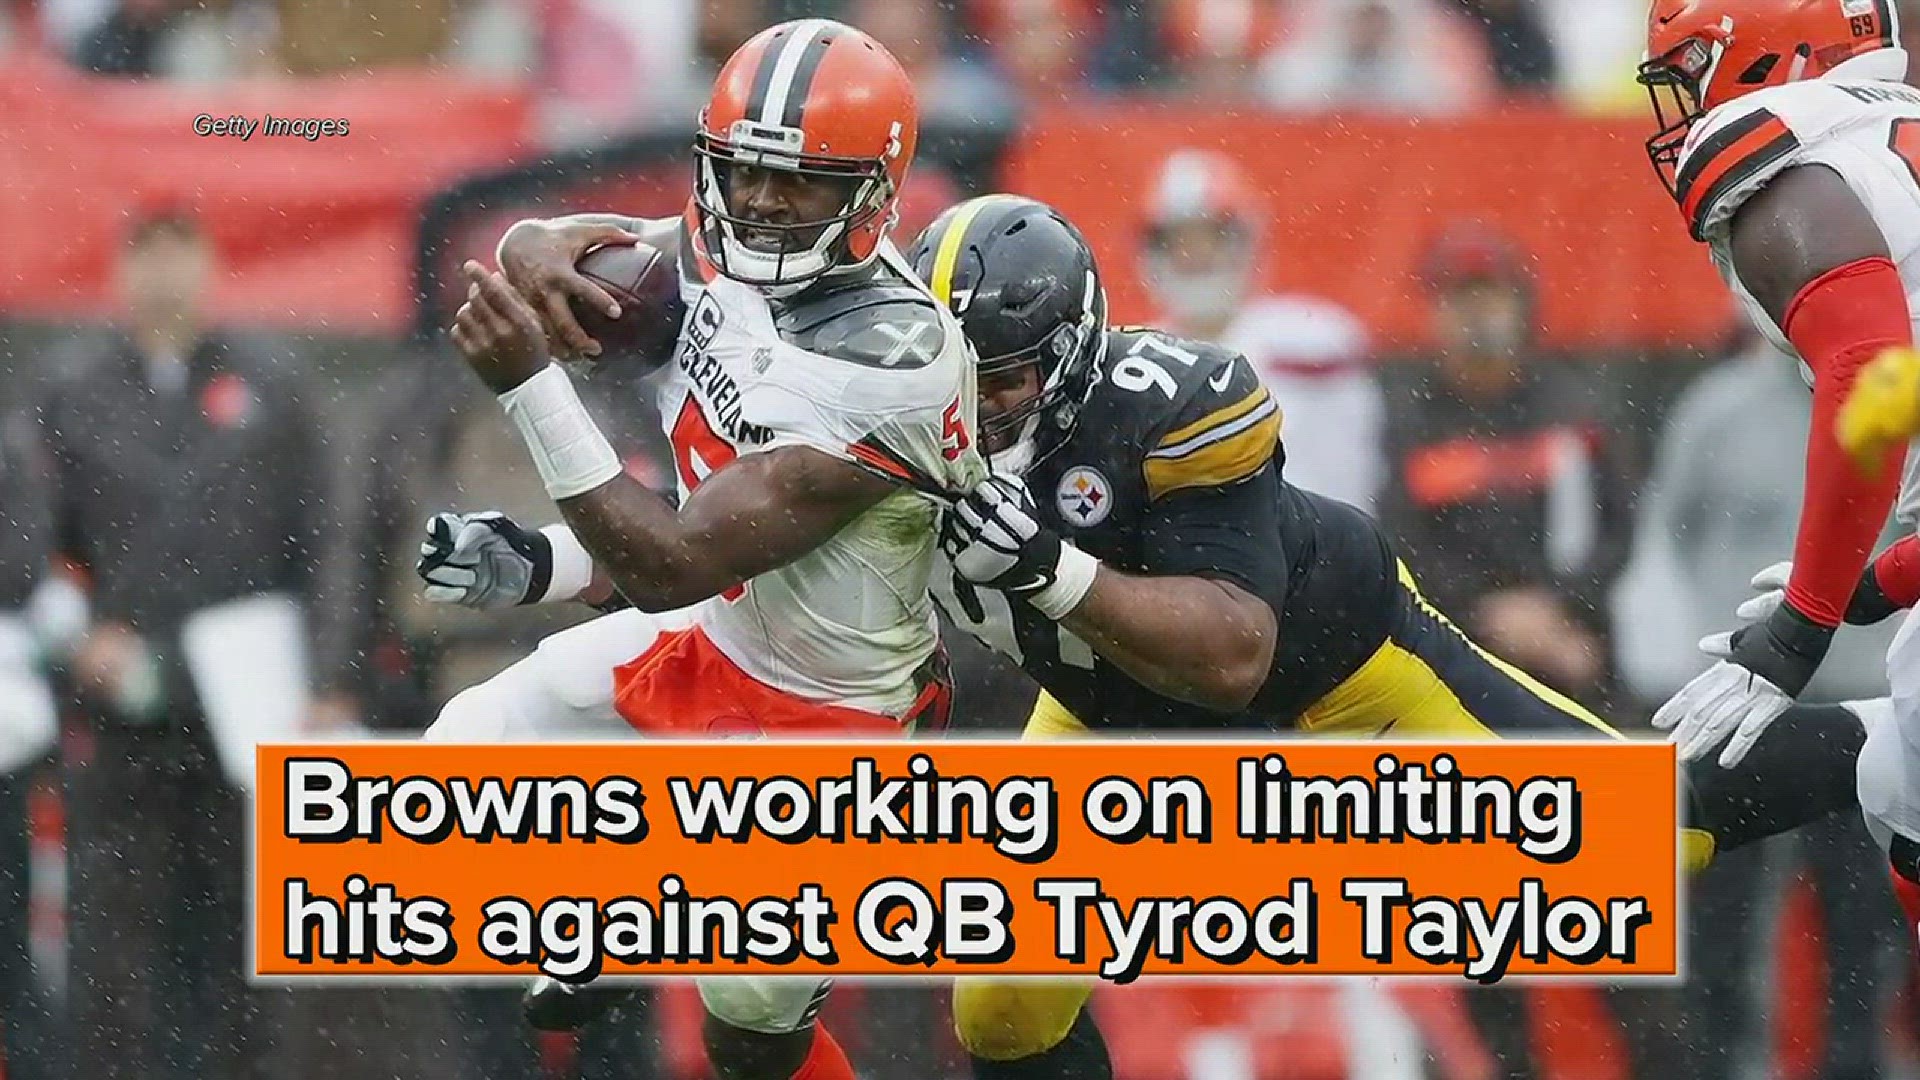 Cleveland Browns working on limiting hits against QB Tyrod Taylor